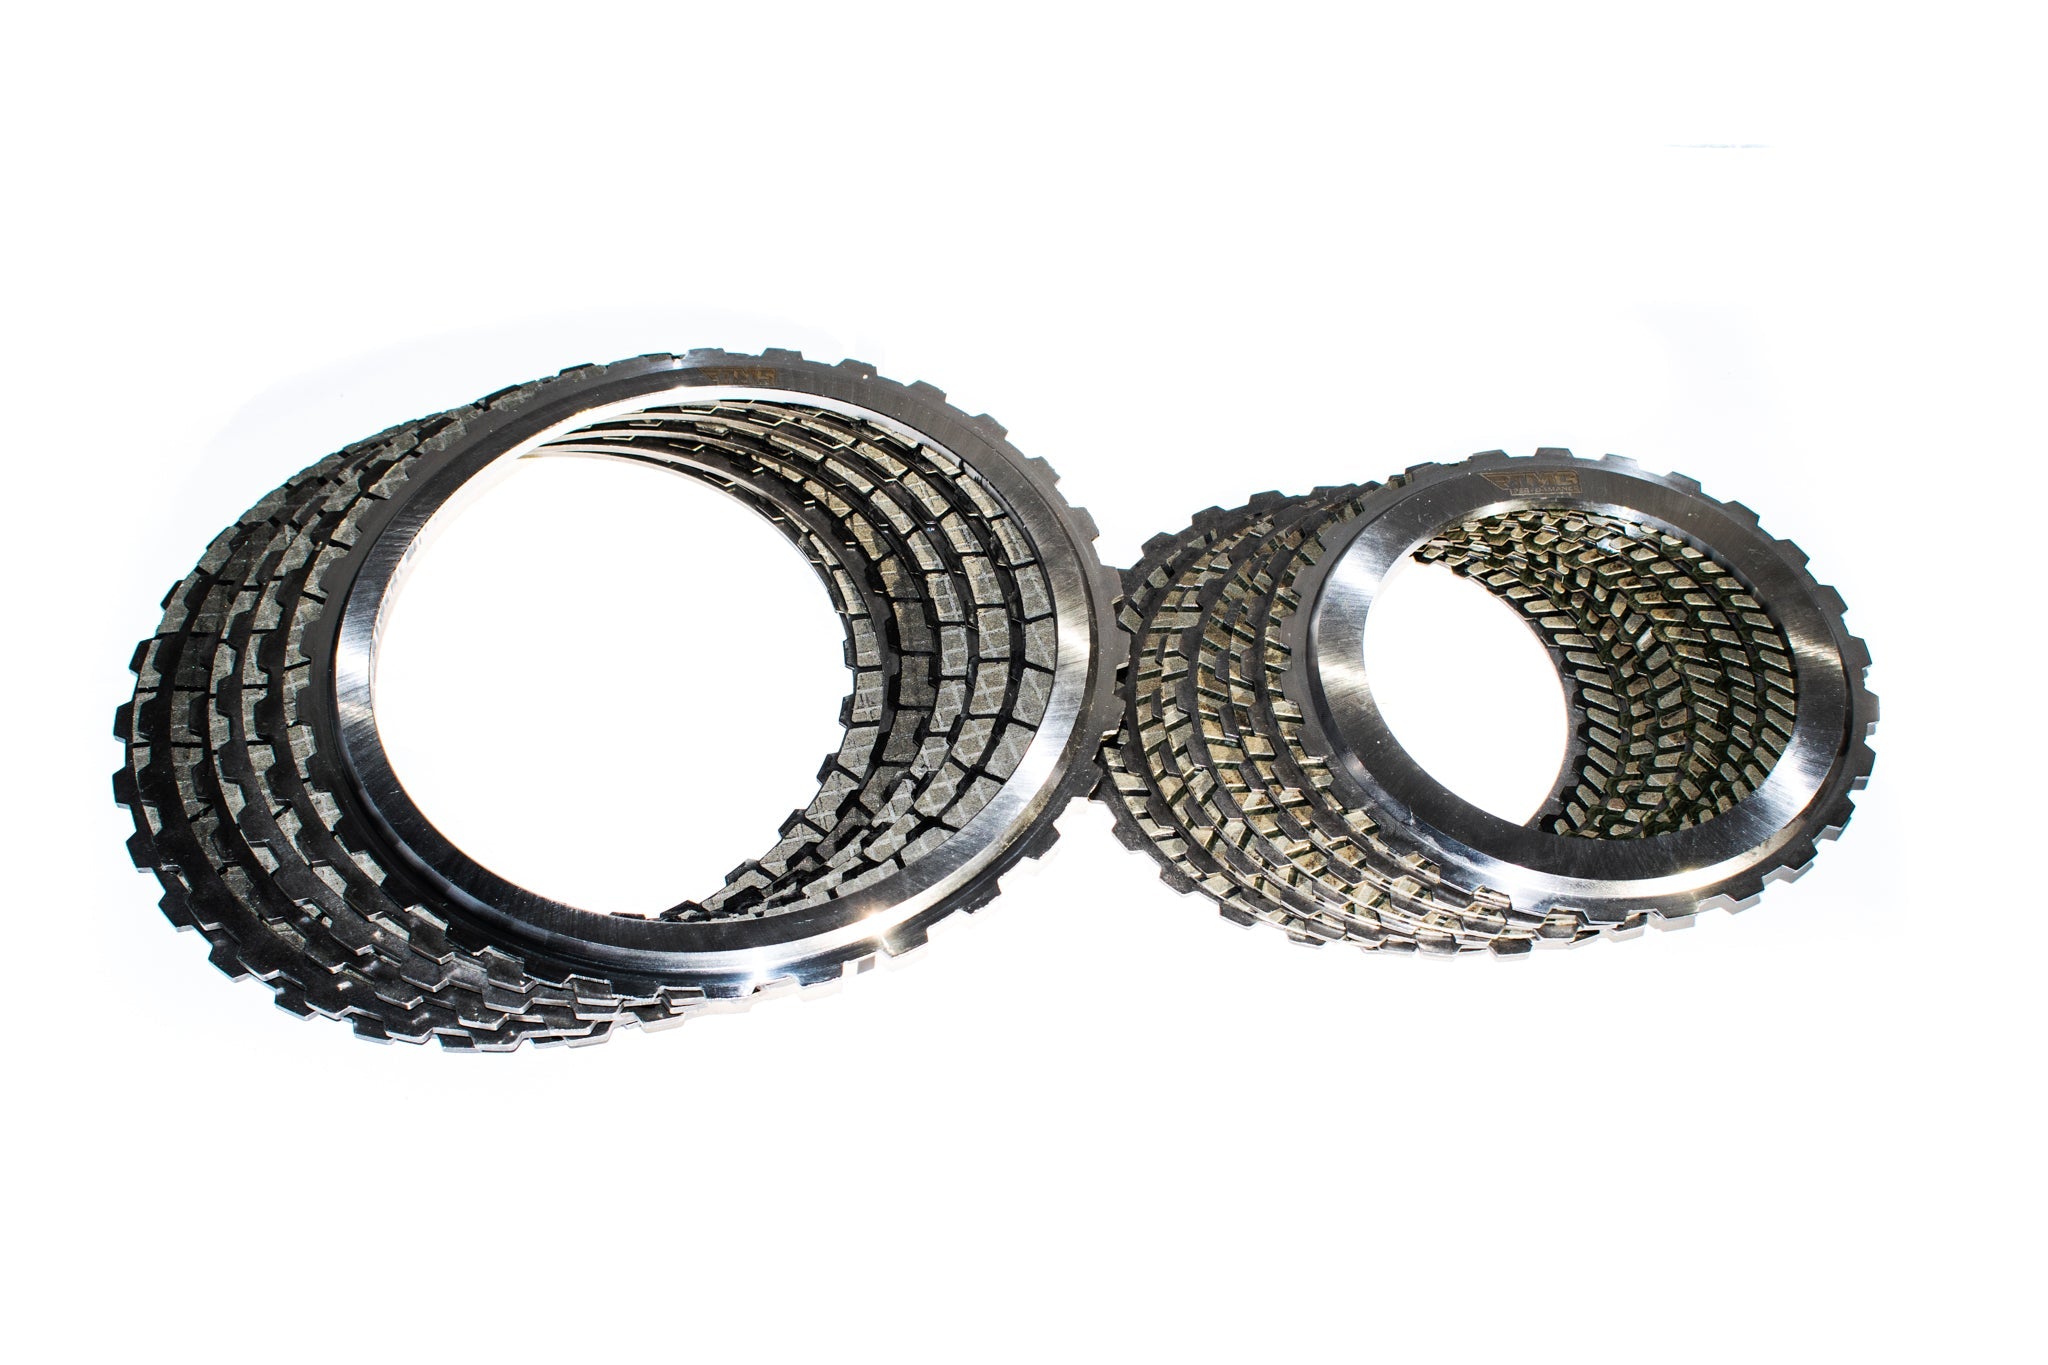 Upgraded Clutch Pack for DSG DQ250 Stock Clutches - Stage 1 - 850Nm - RTMG Performance